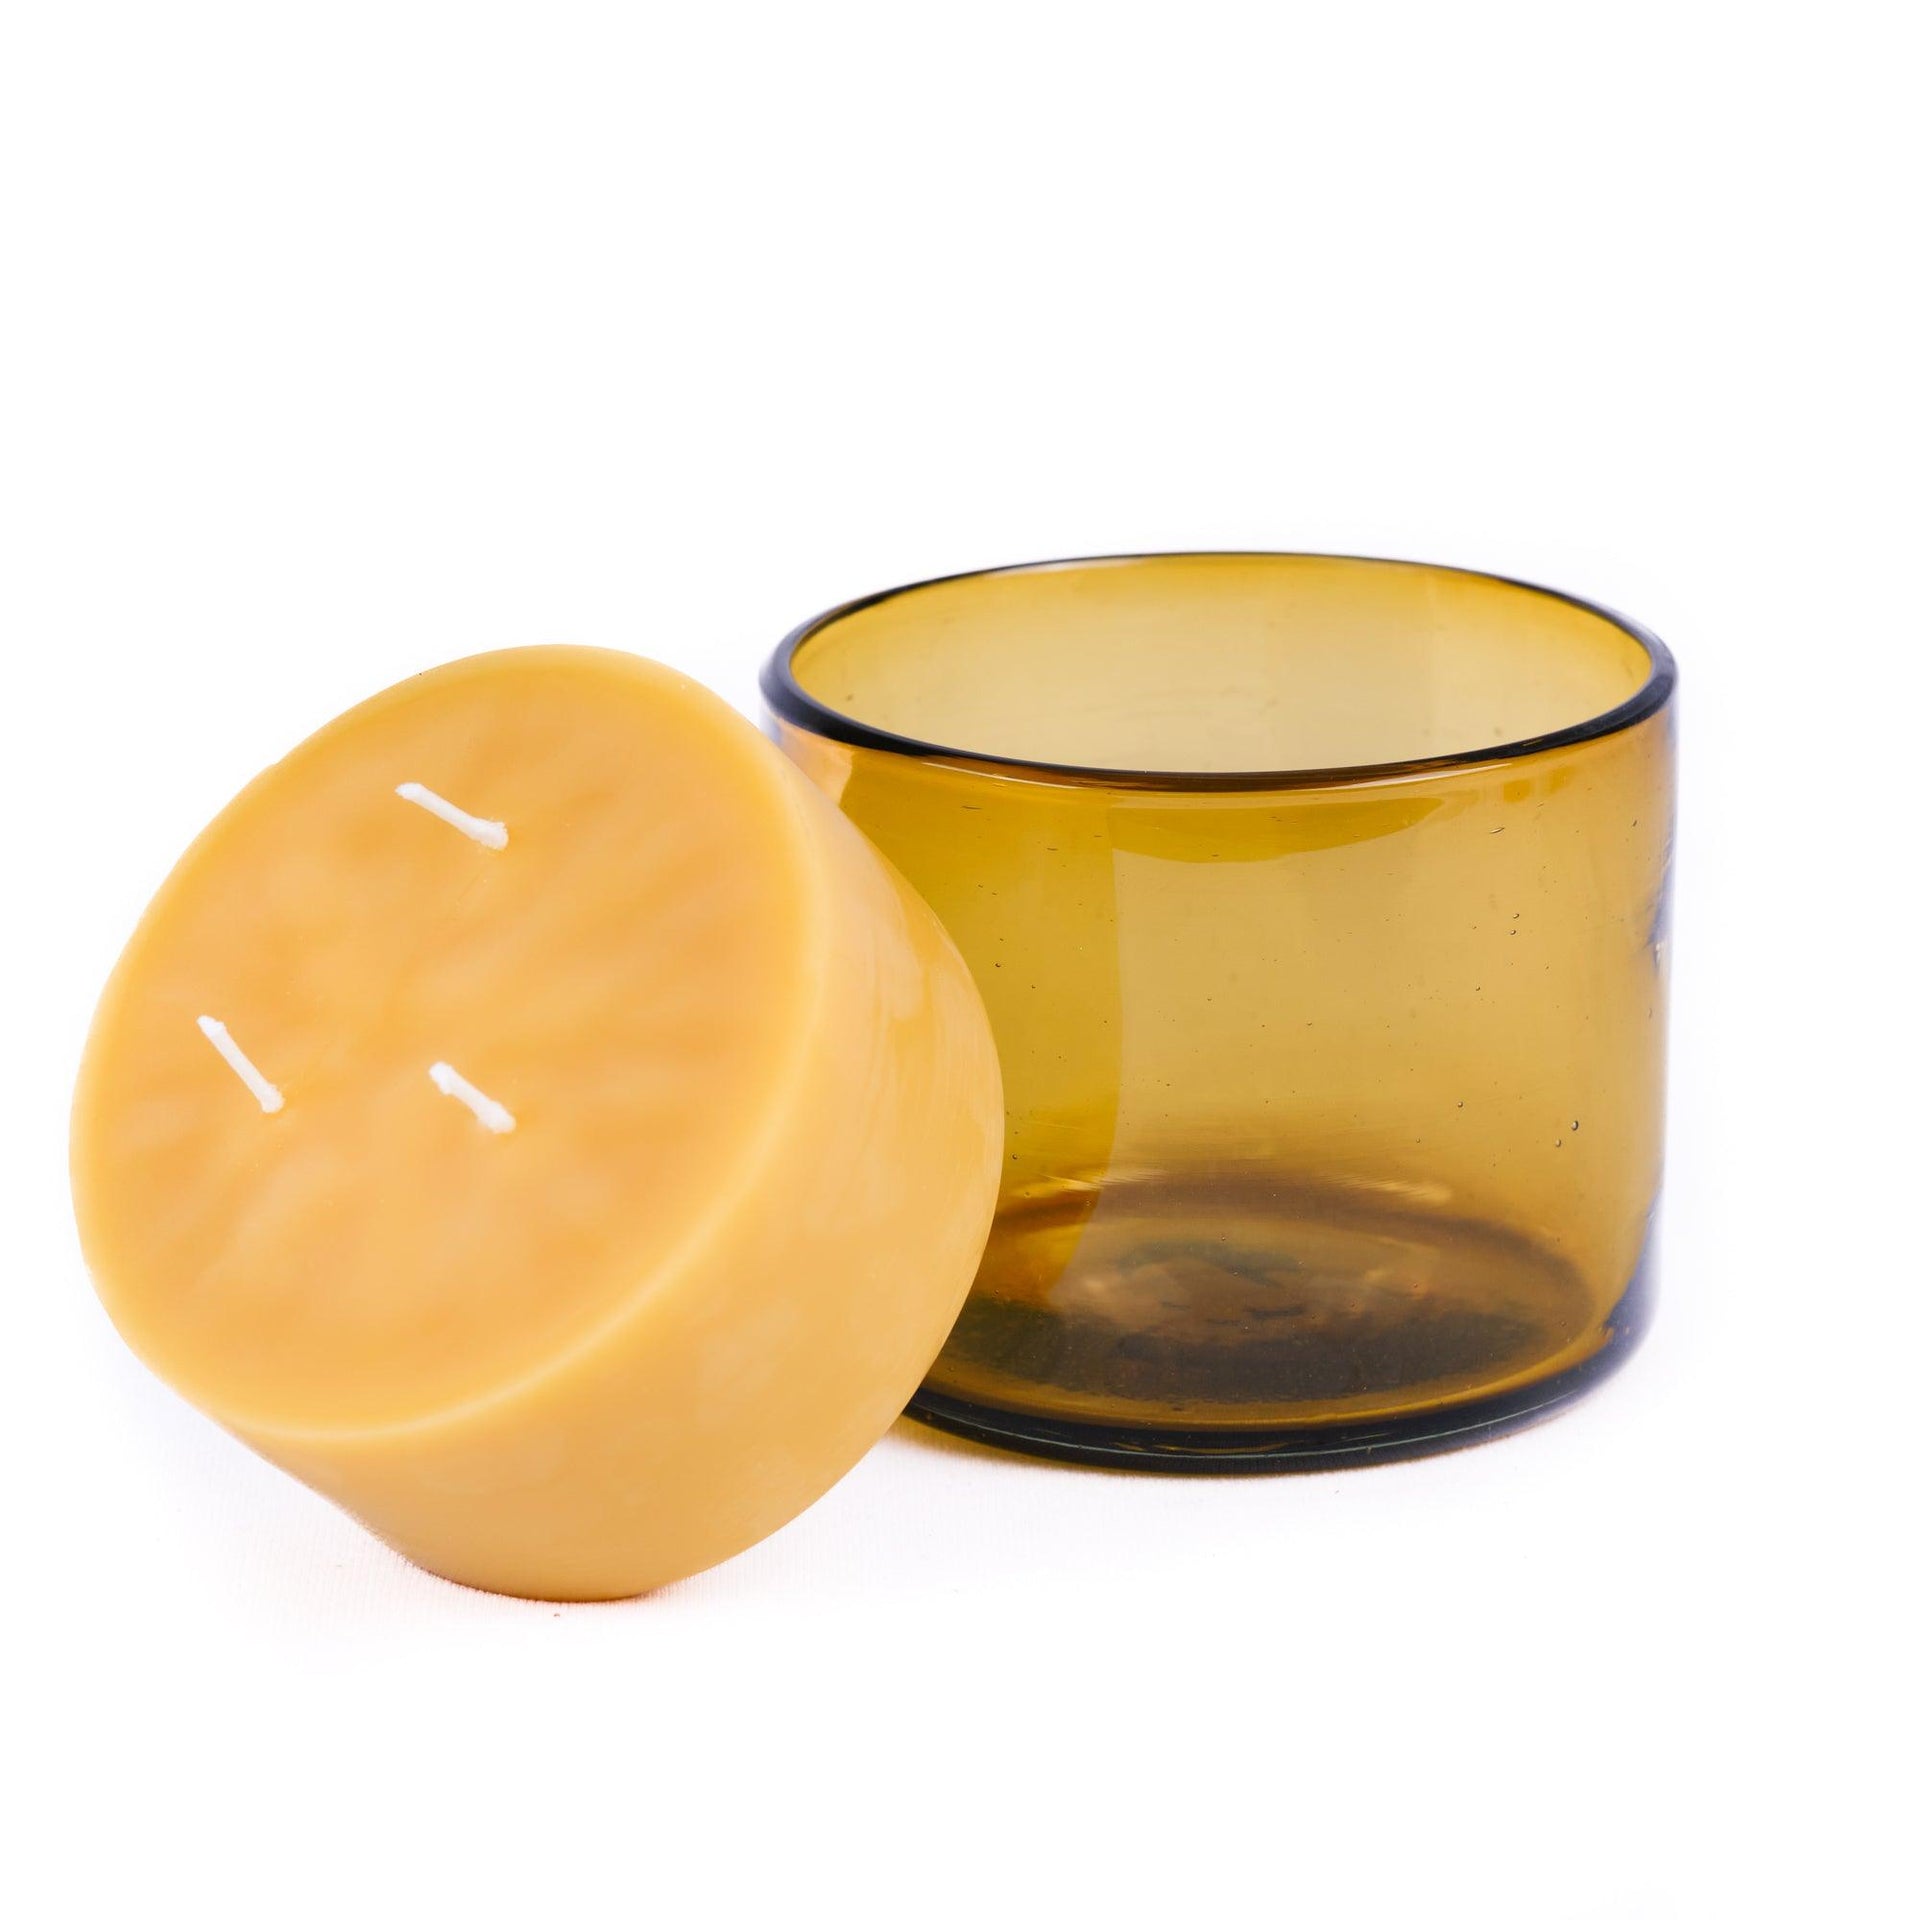 Botanica Beeswax Candle in Blown Glass Lemongrass - Cassia - Rosemary / 22 oz